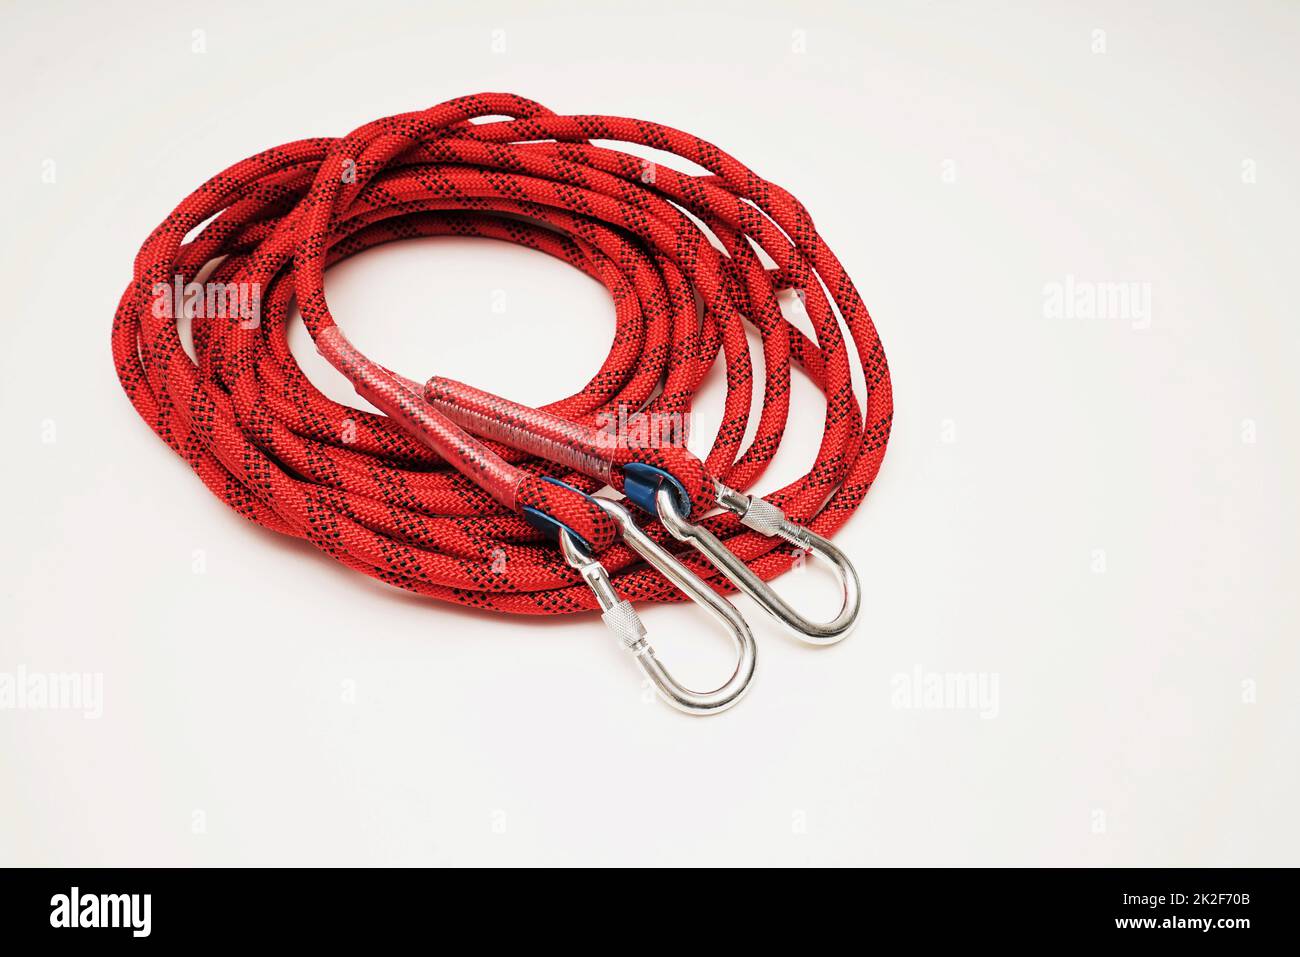 Red climbing rope on white background Stock Photo